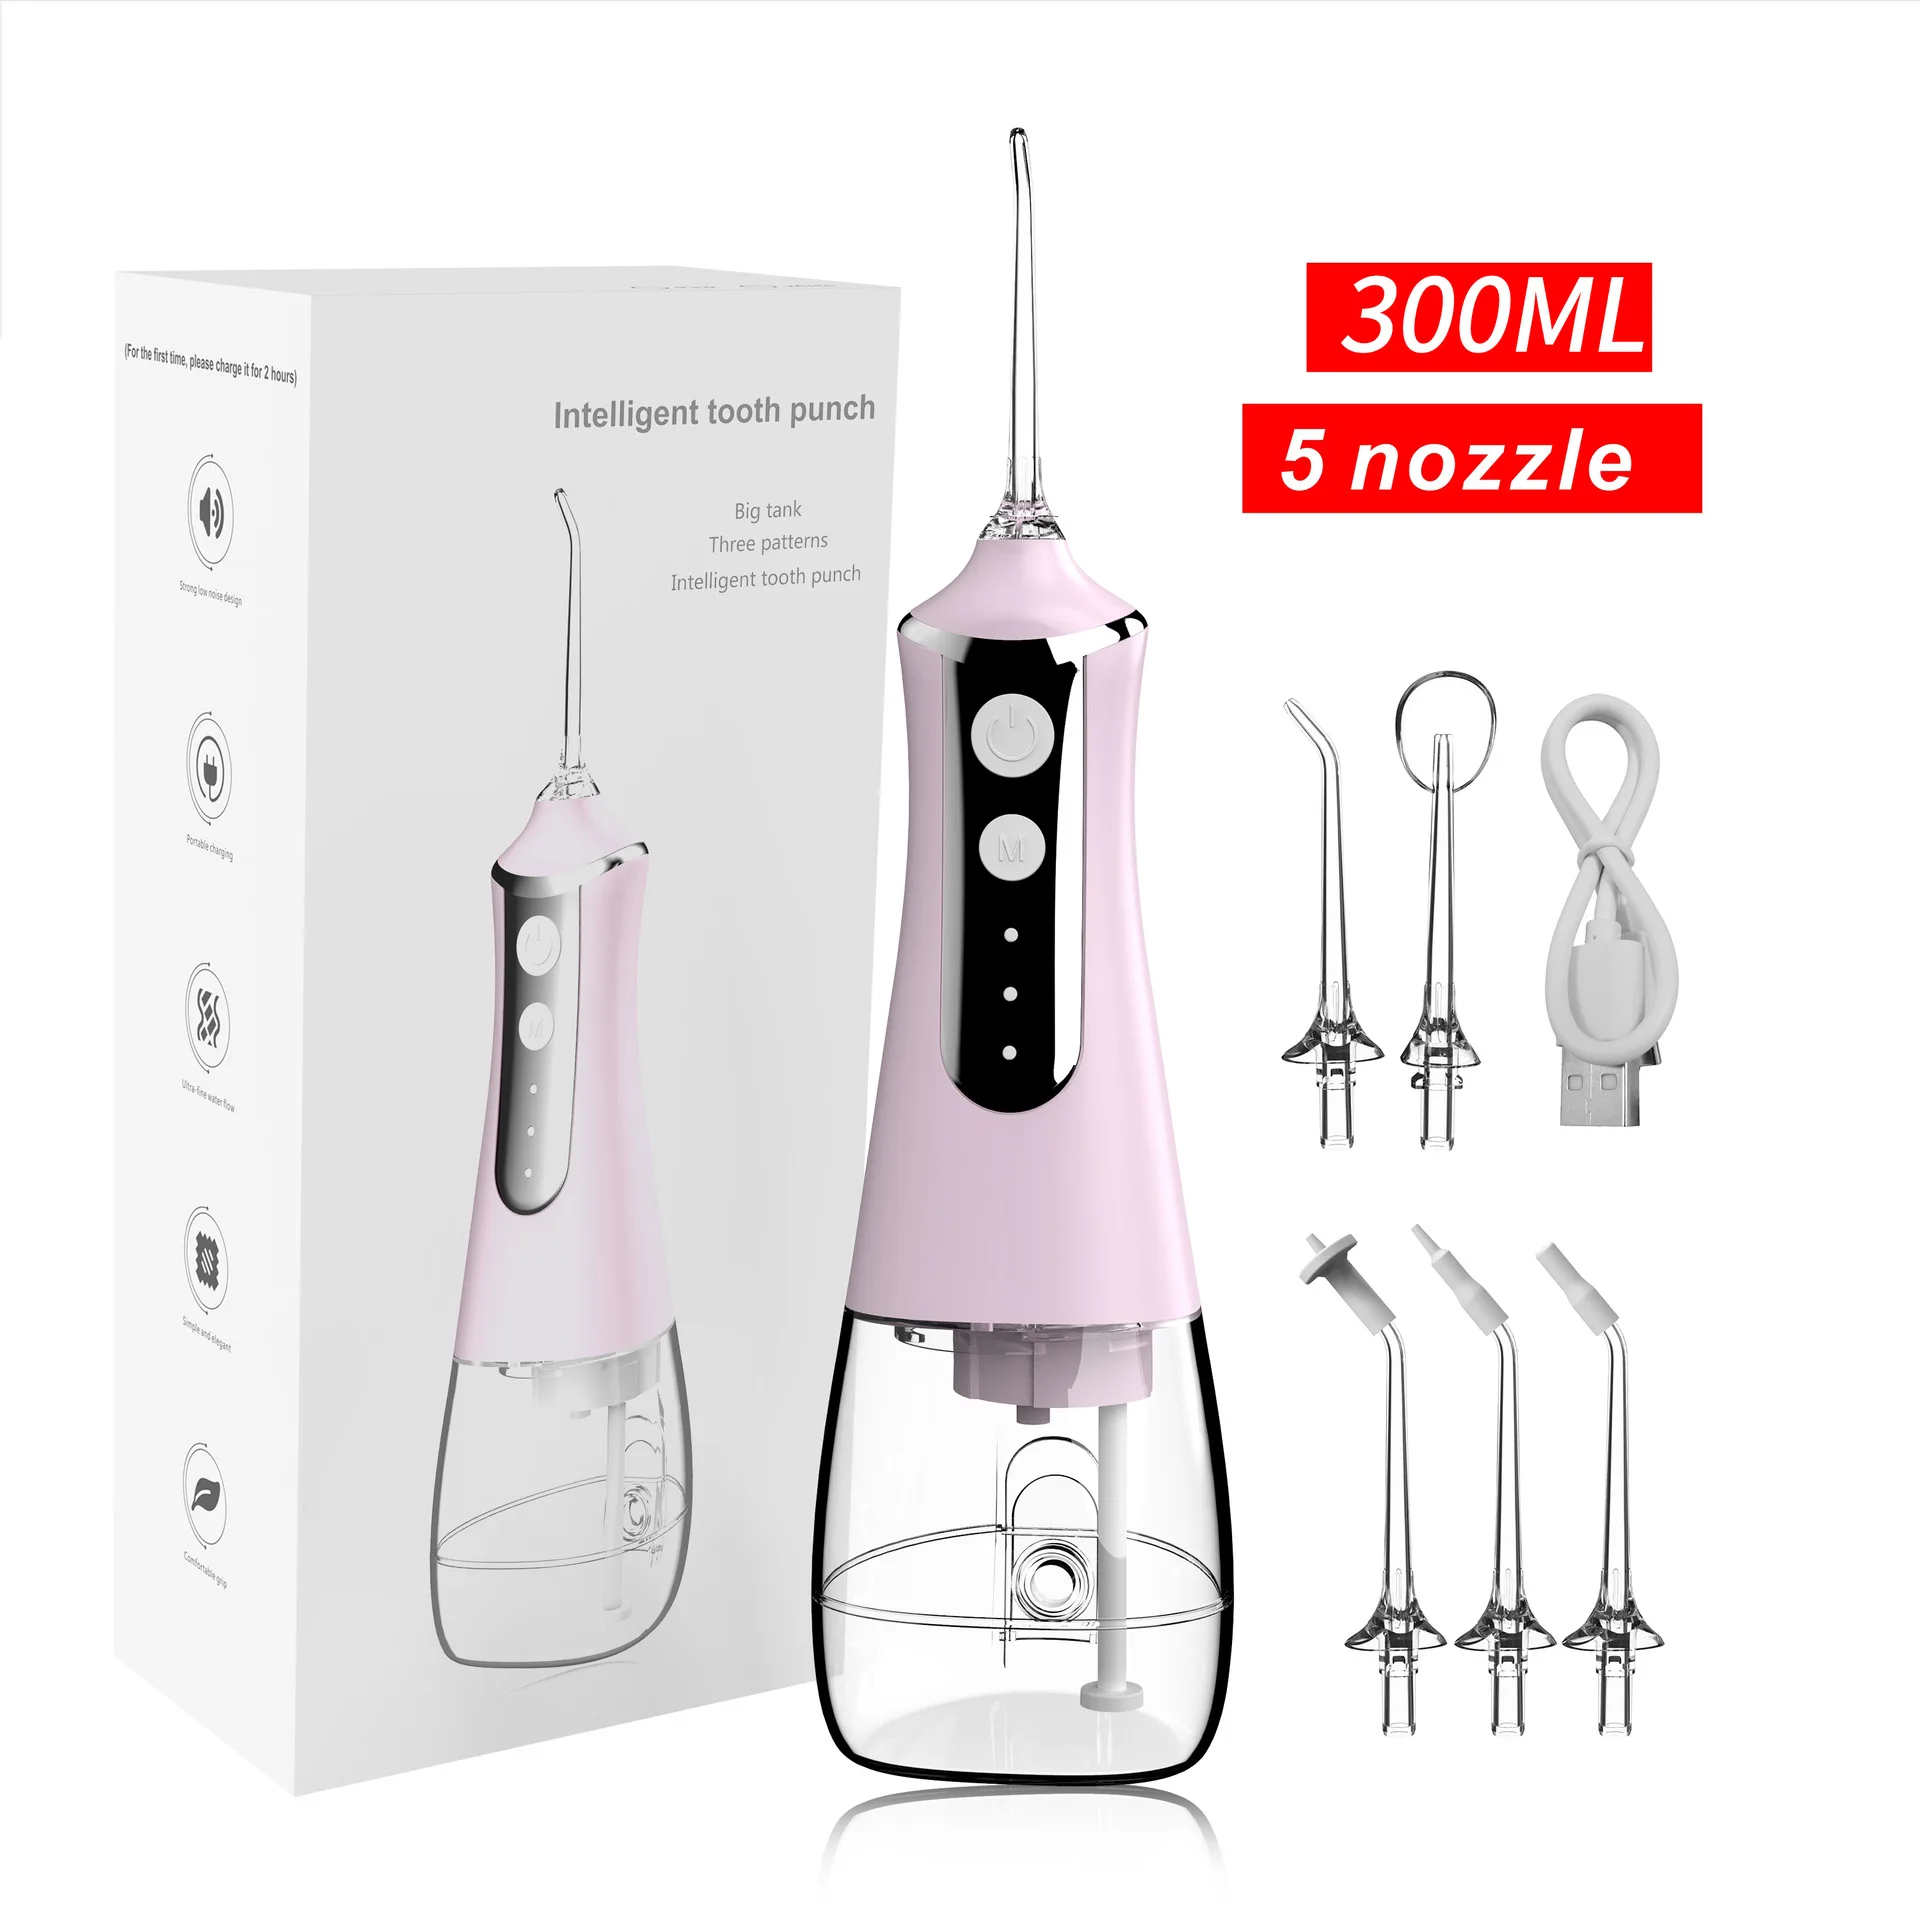 Portable Oral Irrigator with Travel Bag Water Flosser USB Rechargeable 5 Nozzles Water Jet 300ml Water Tank Waterproof IP6